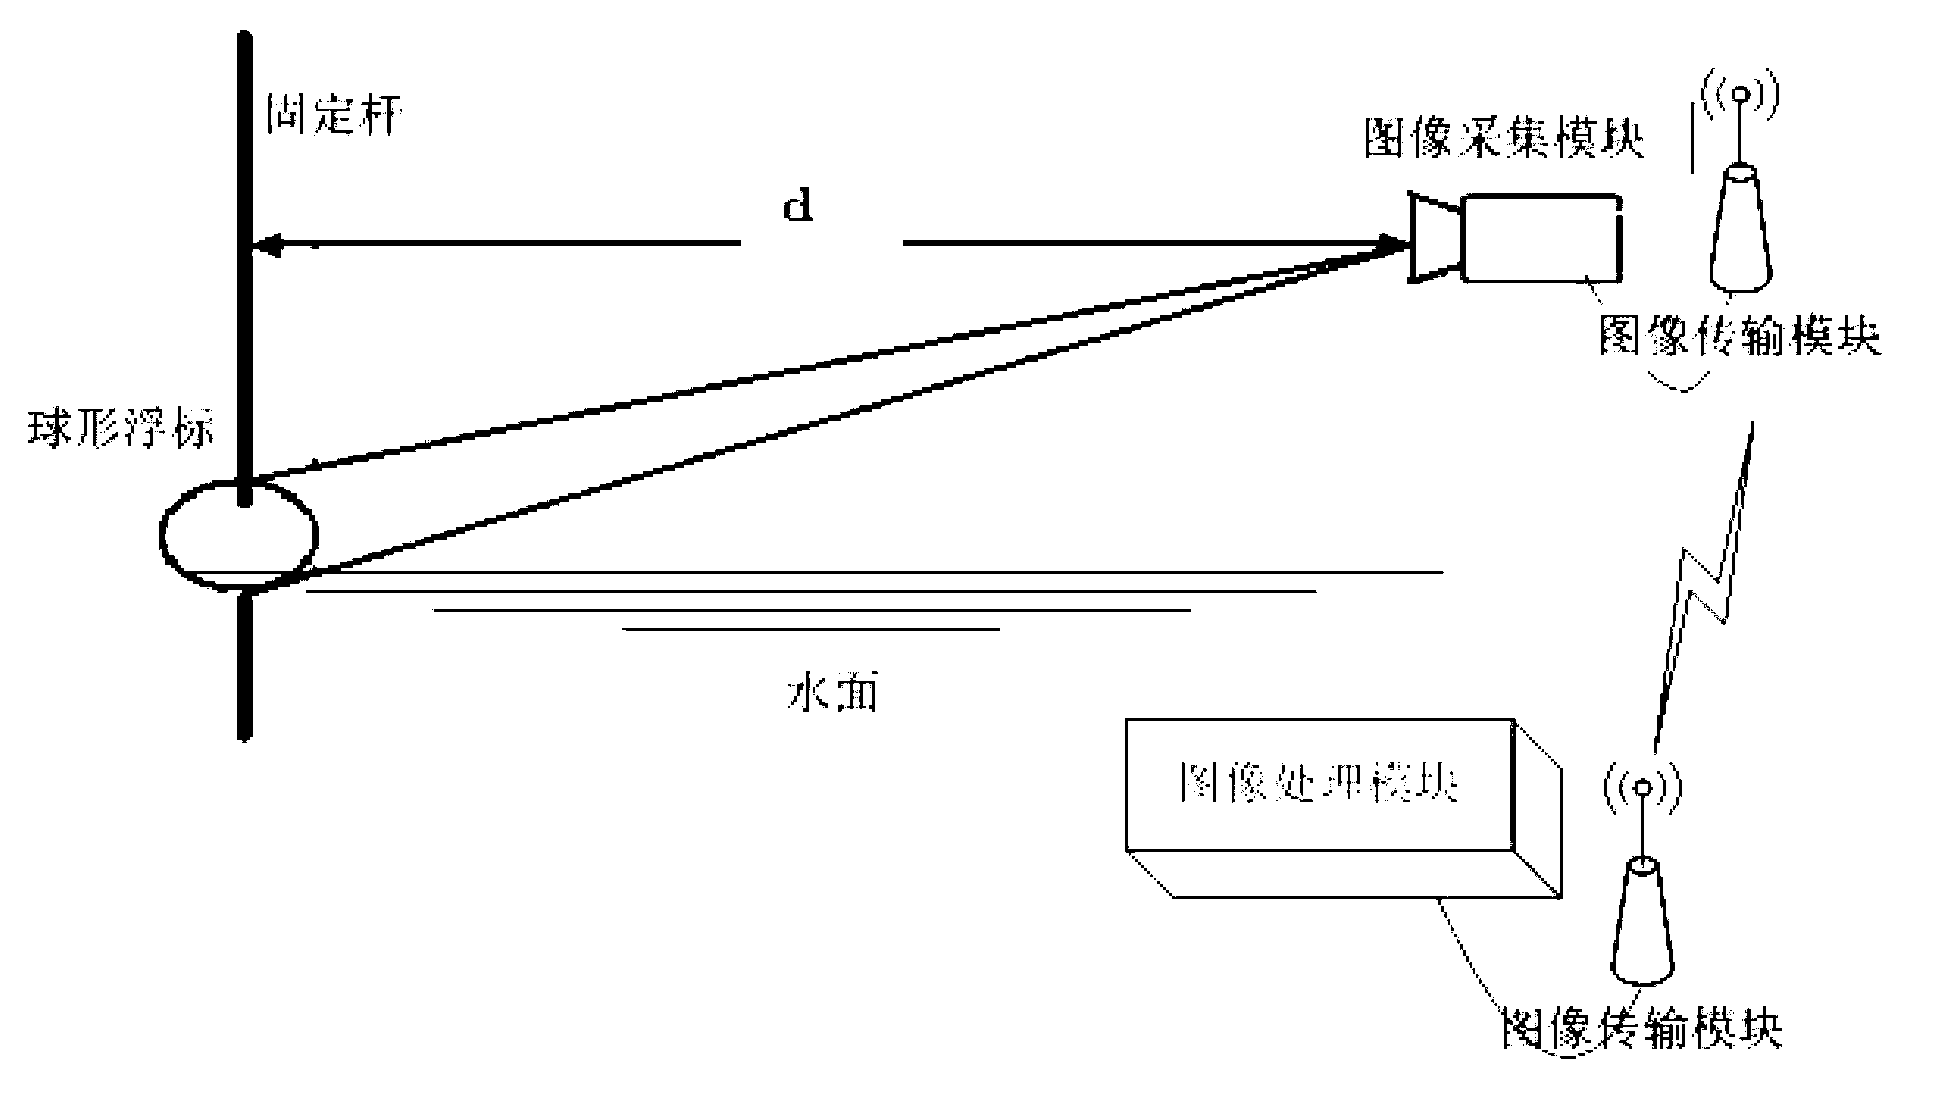 Water level measuring system and method based on digital image processing